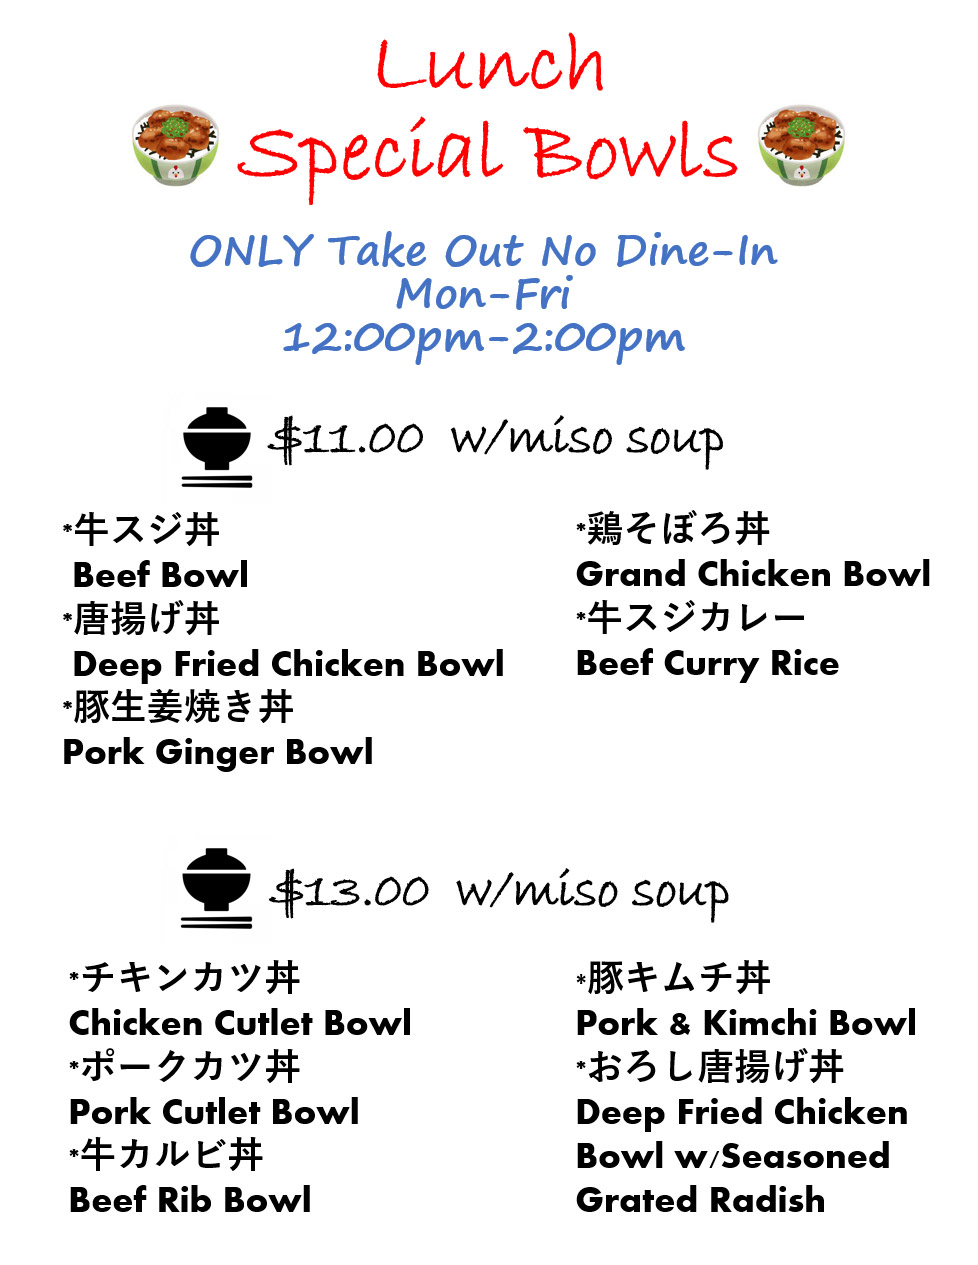 Lunch Special Bowls